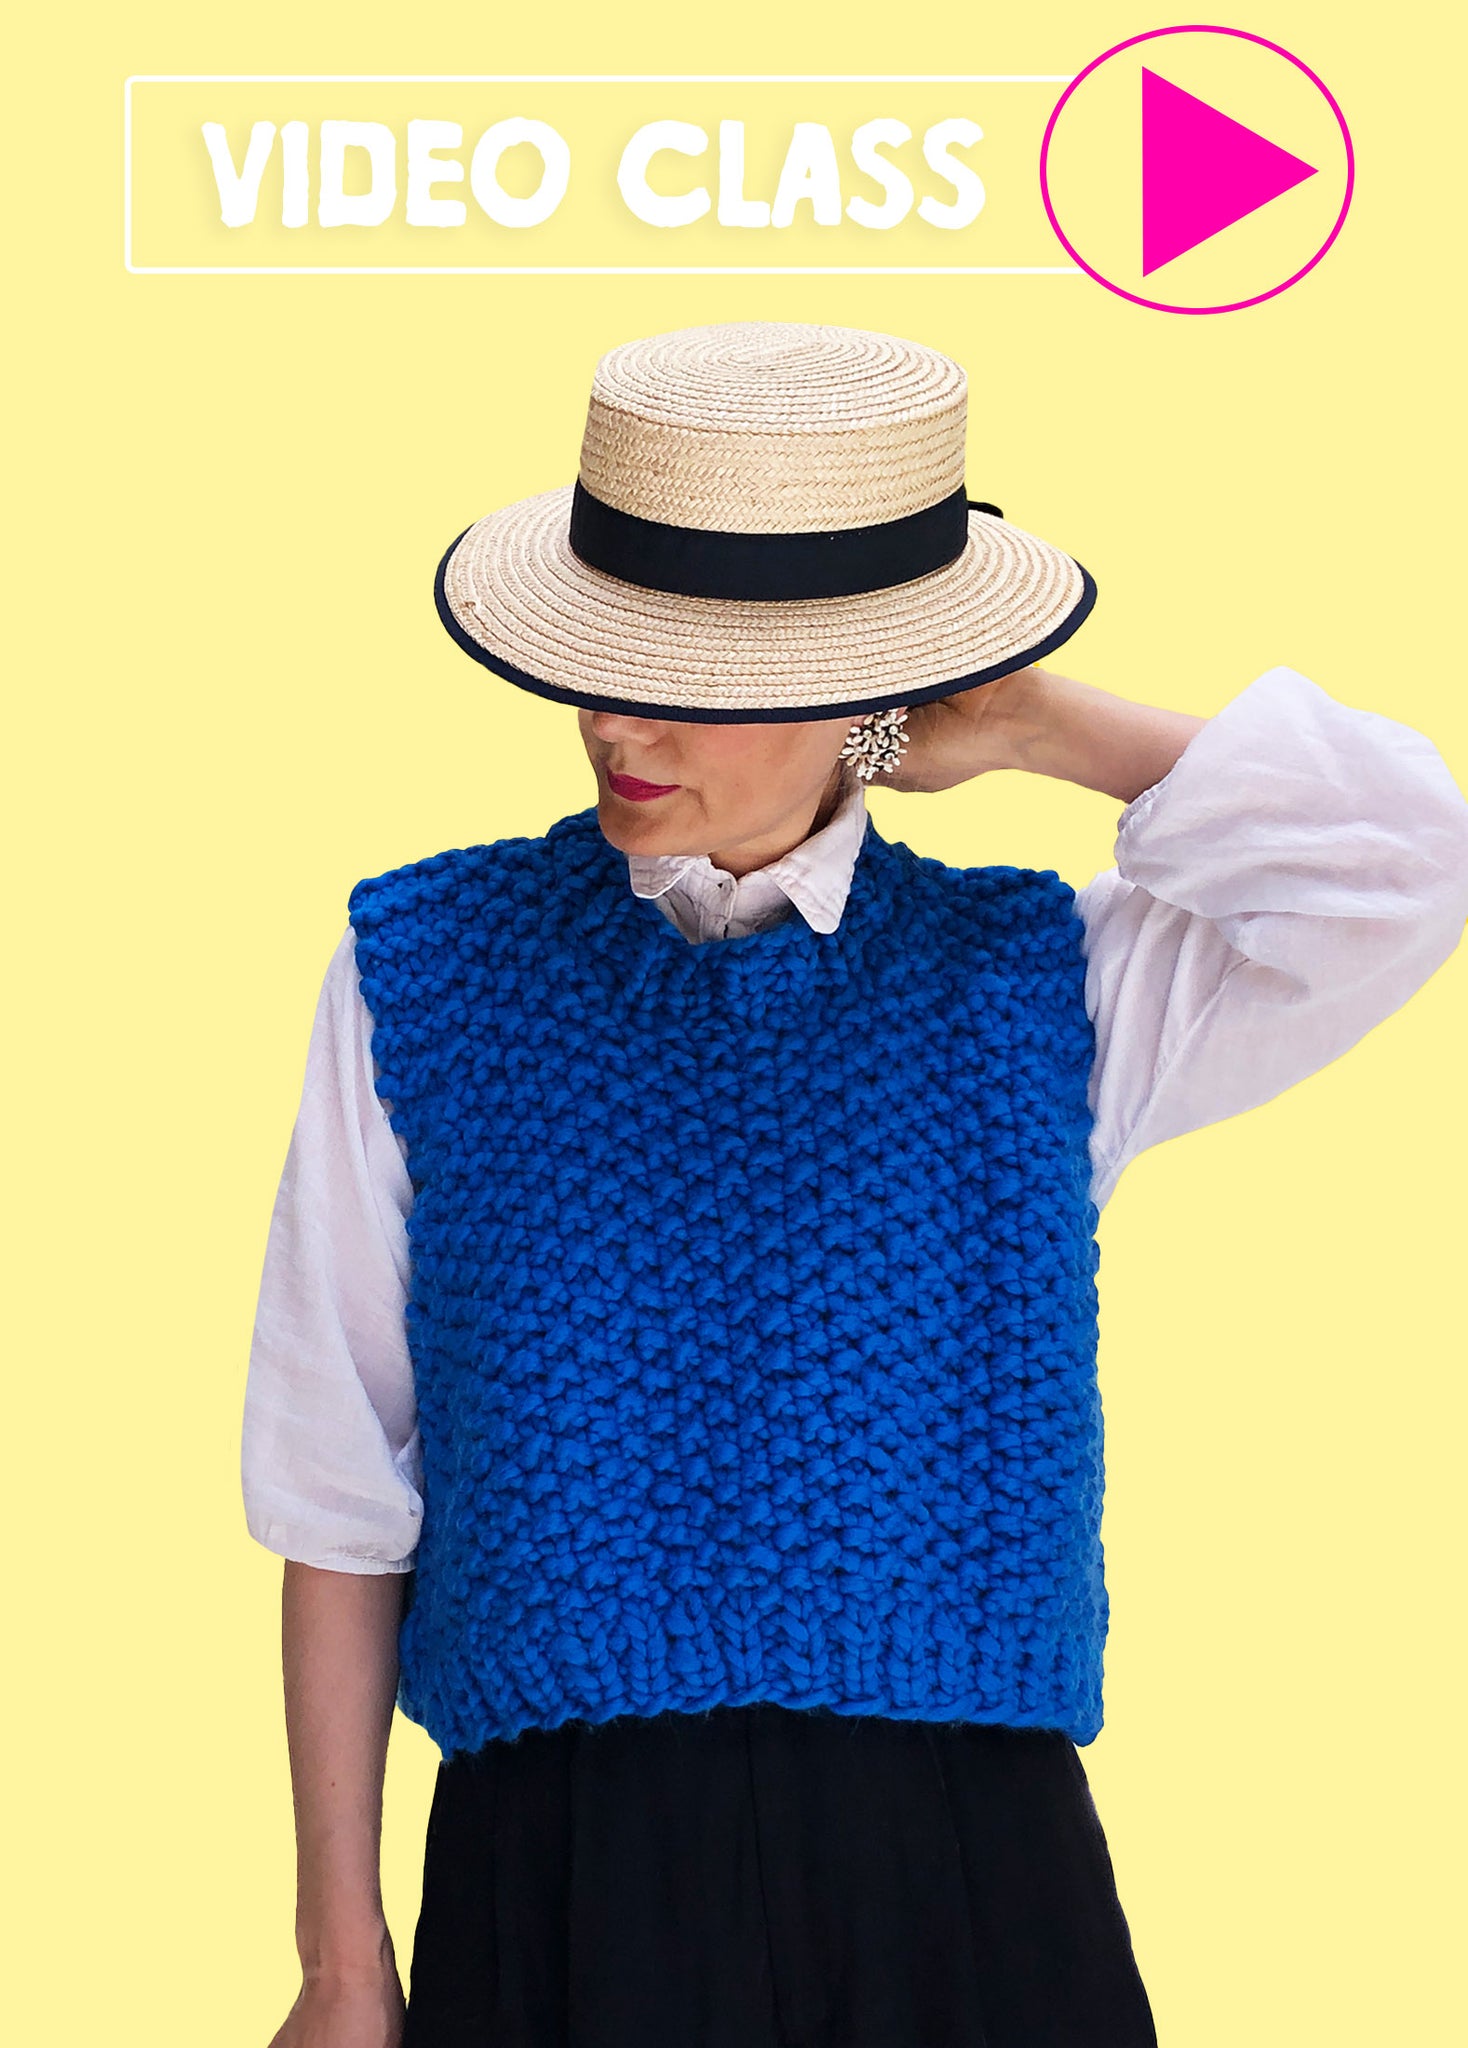 Video Class: How To Knit Easy Vest Step-by-Step